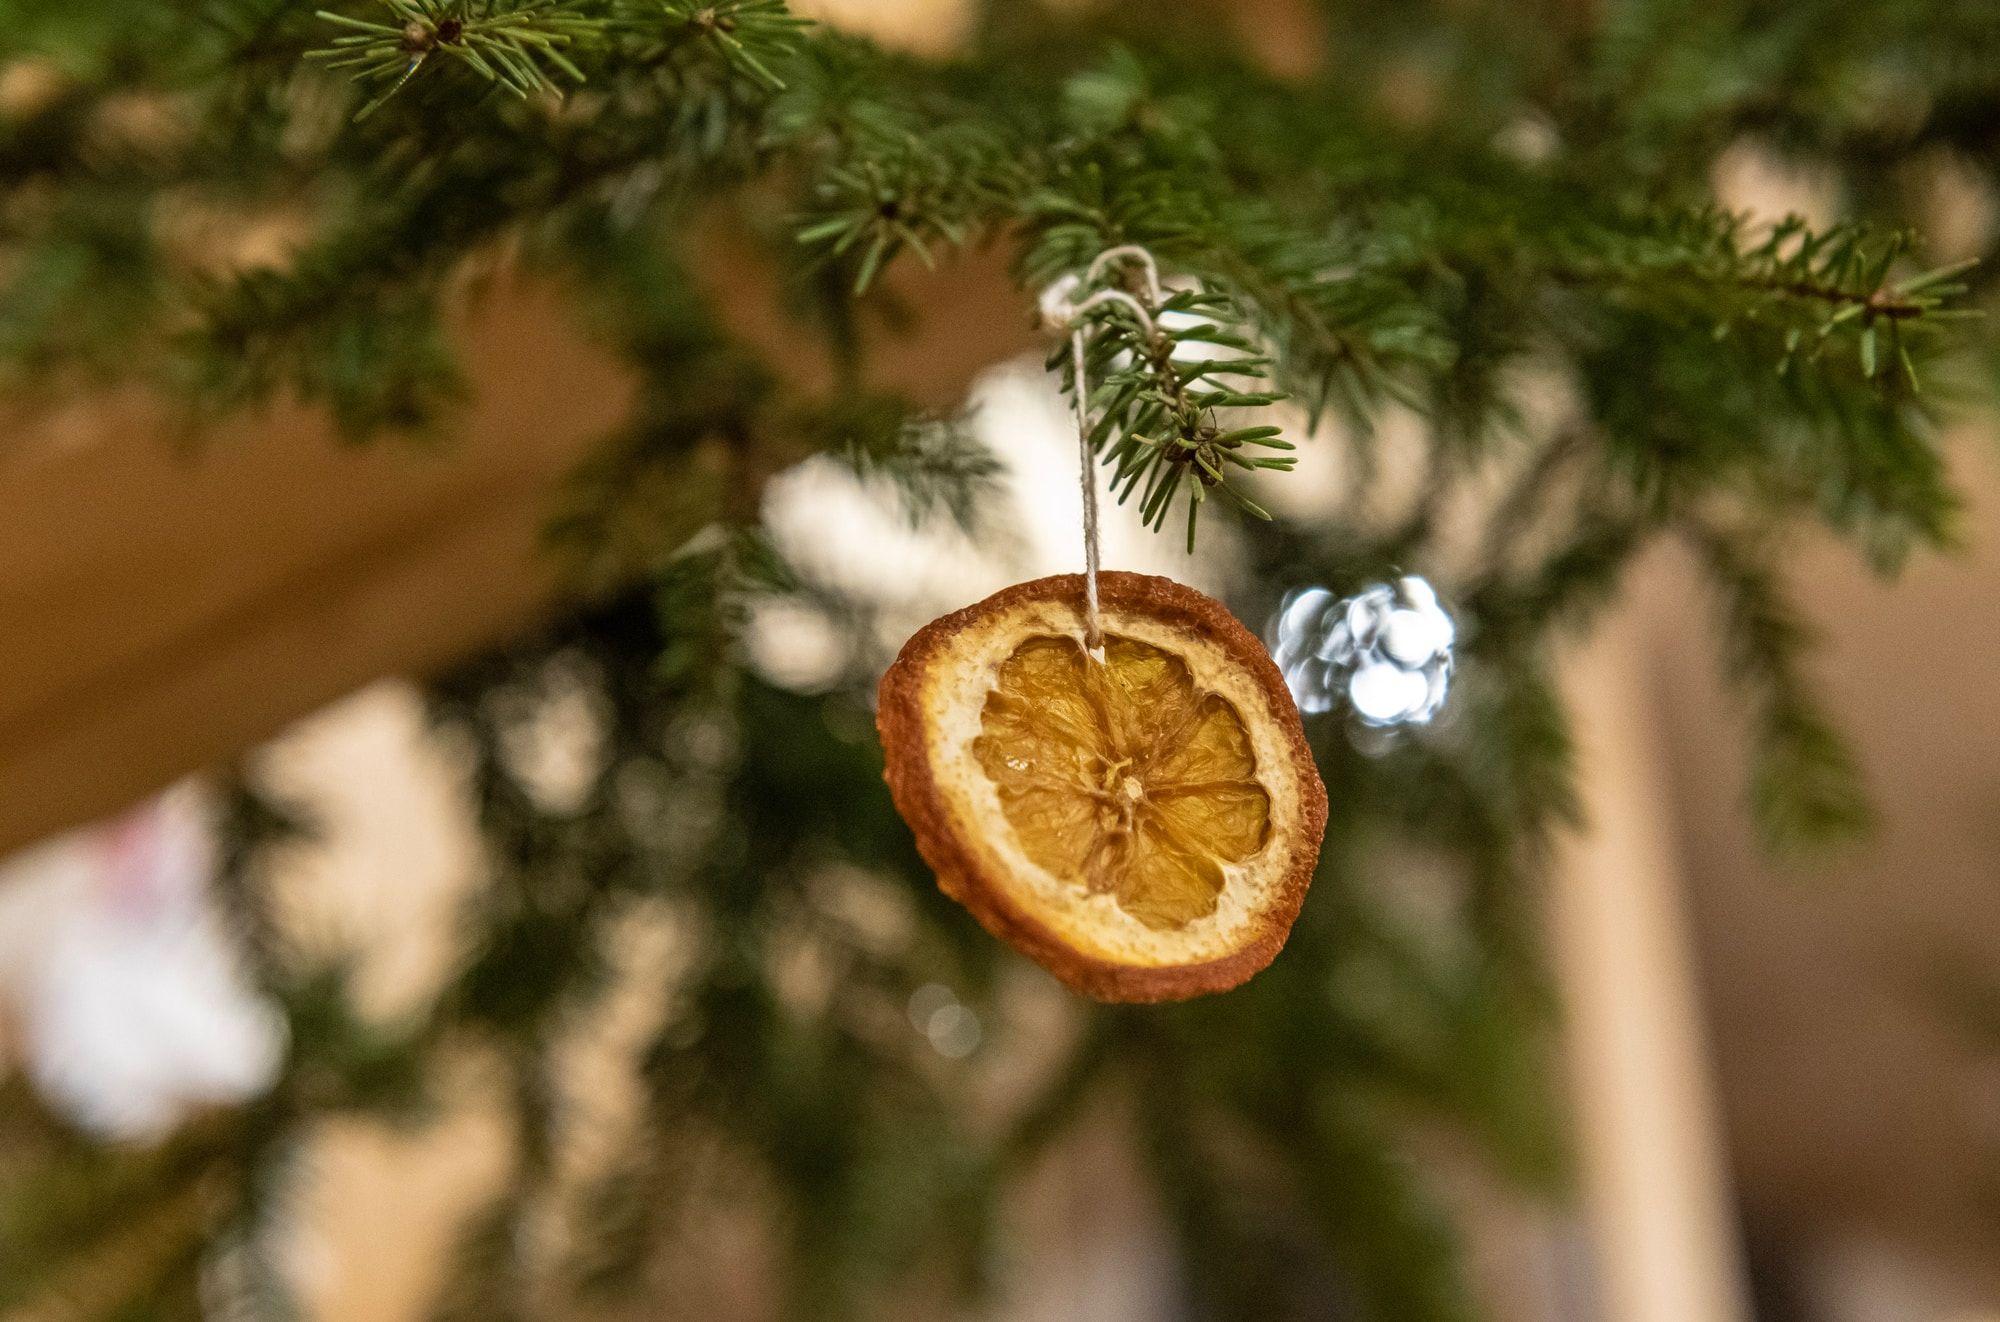 A dried slice or orange used as a Christmas tree decoration